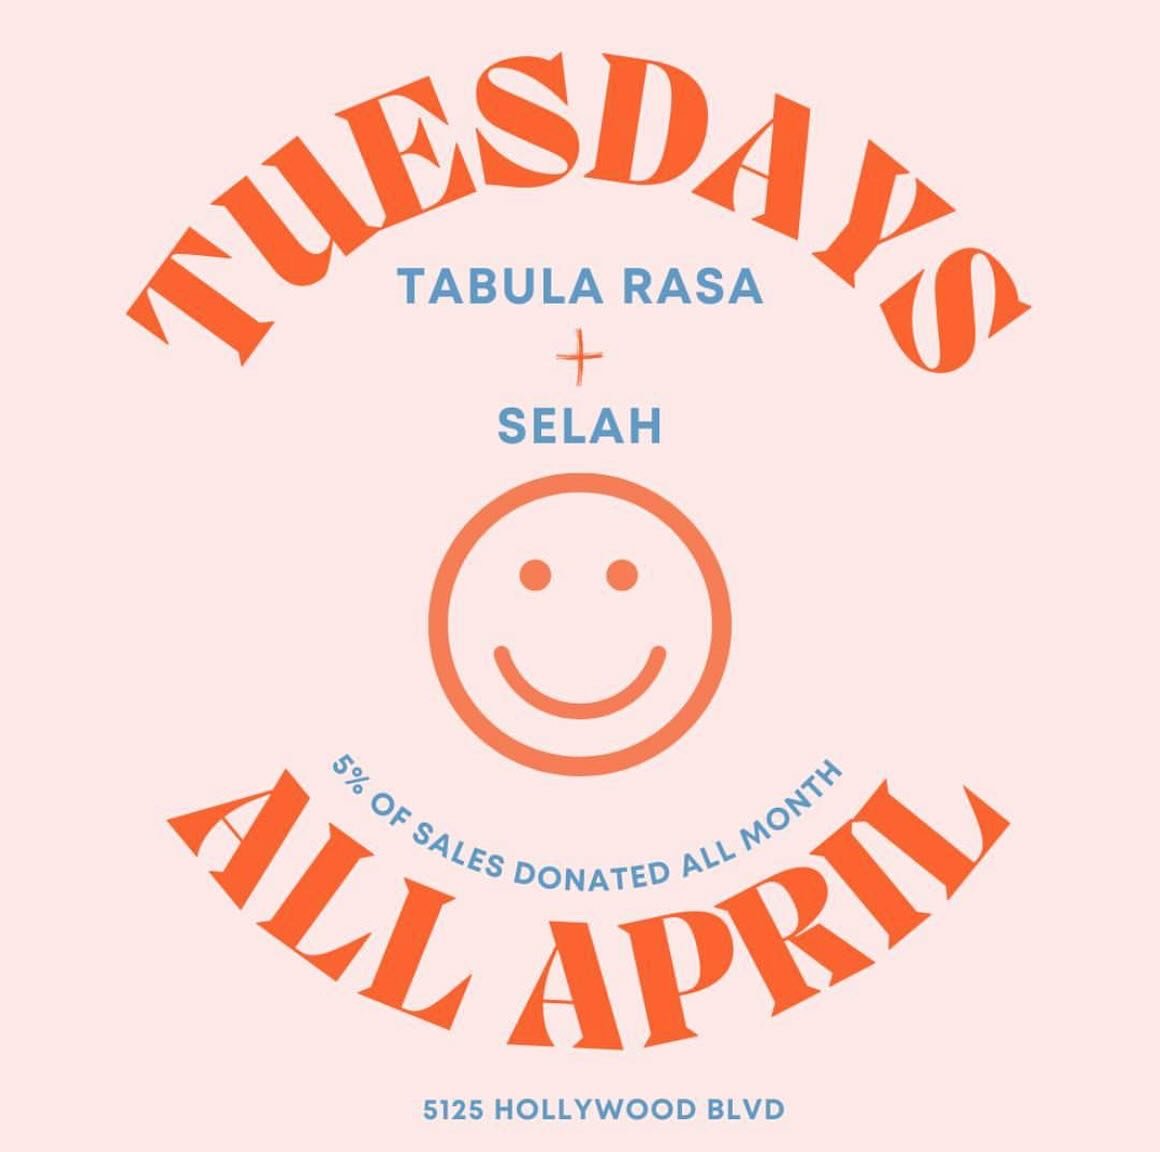 Happy Tuesday, y&rsquo;all! its Giving Tuesday with a proceed of profits going to the incredible @selahnhc and it is also @theguidetrio night with live jazz! see ya at Tabula Rasa Bar! #tabularasabar